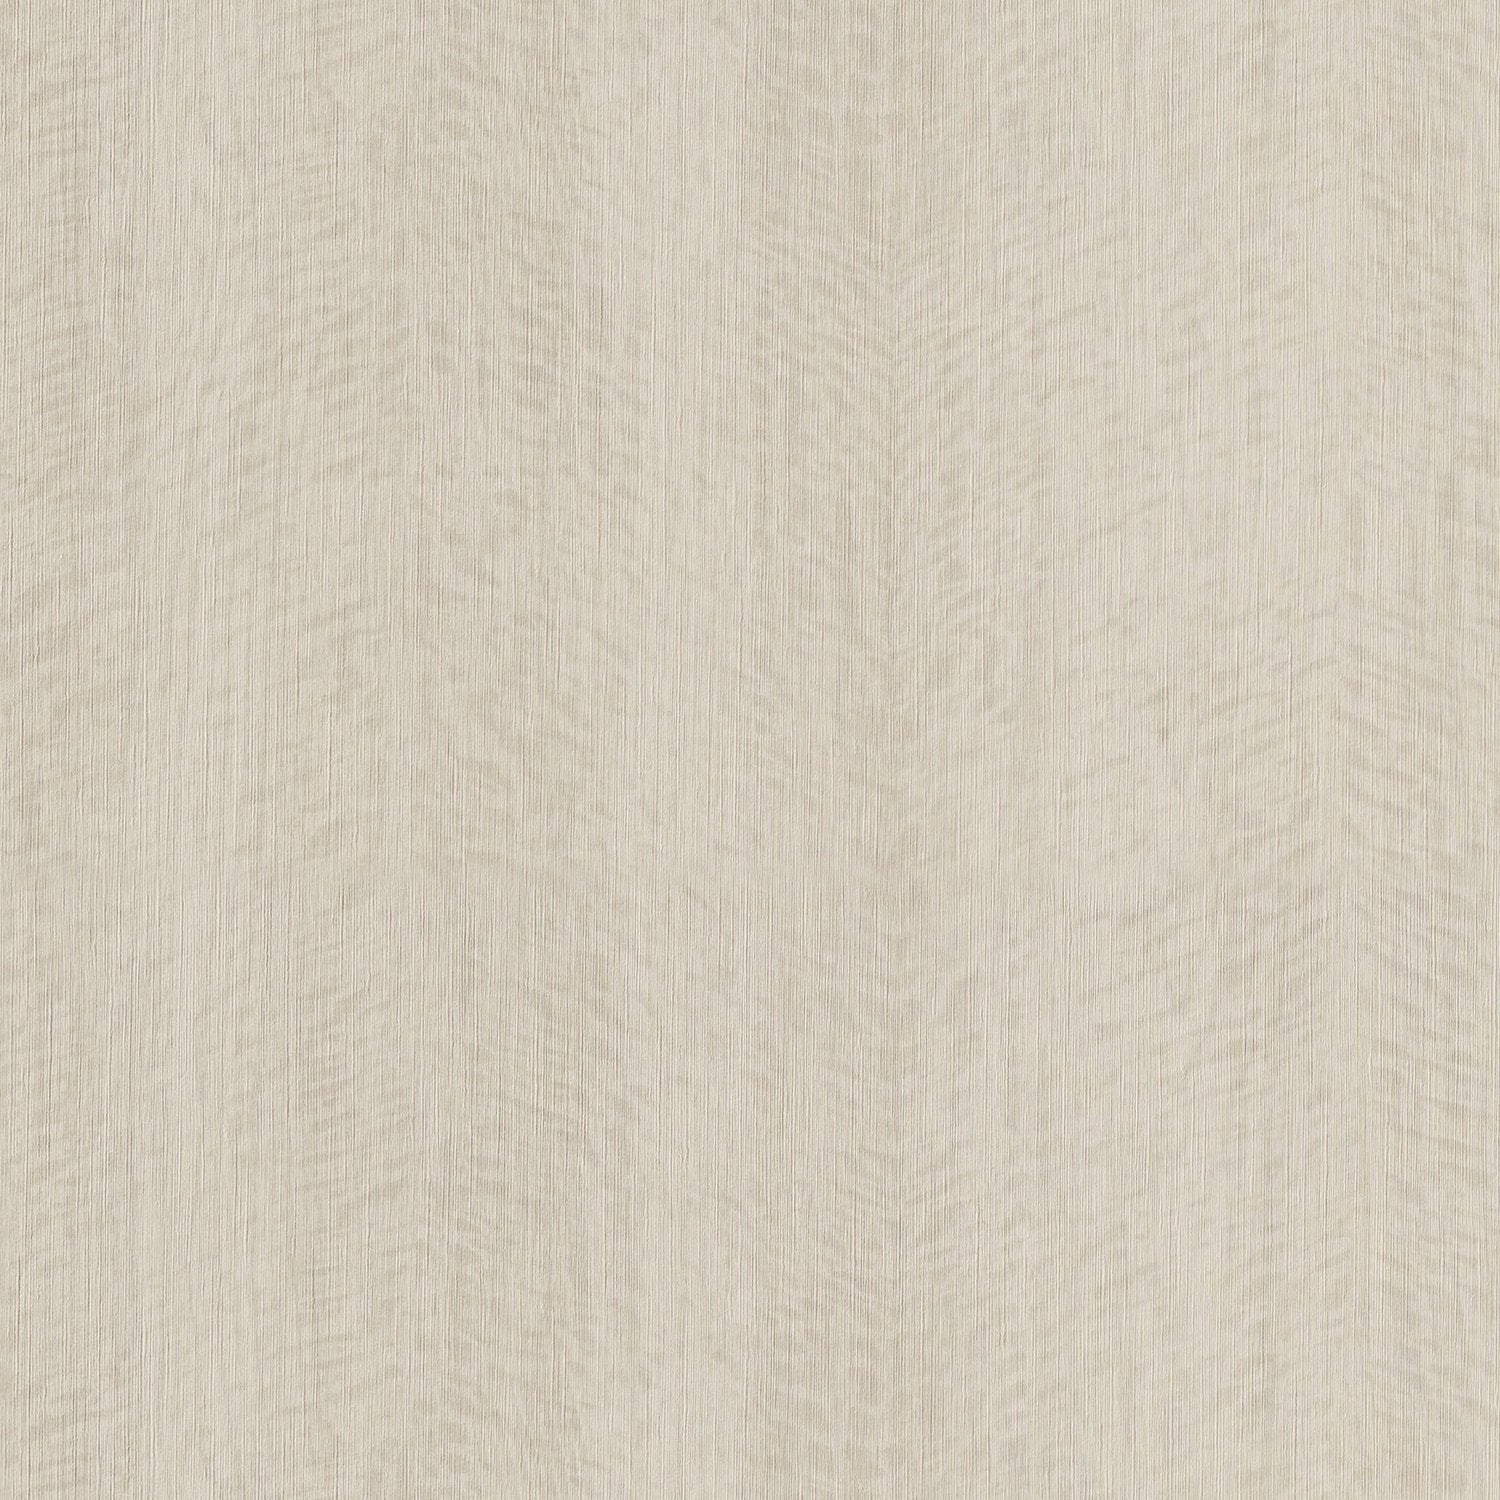 Woodn't It Be Nice - Y47878 - Wallcovering - Vycon - Kube Contract